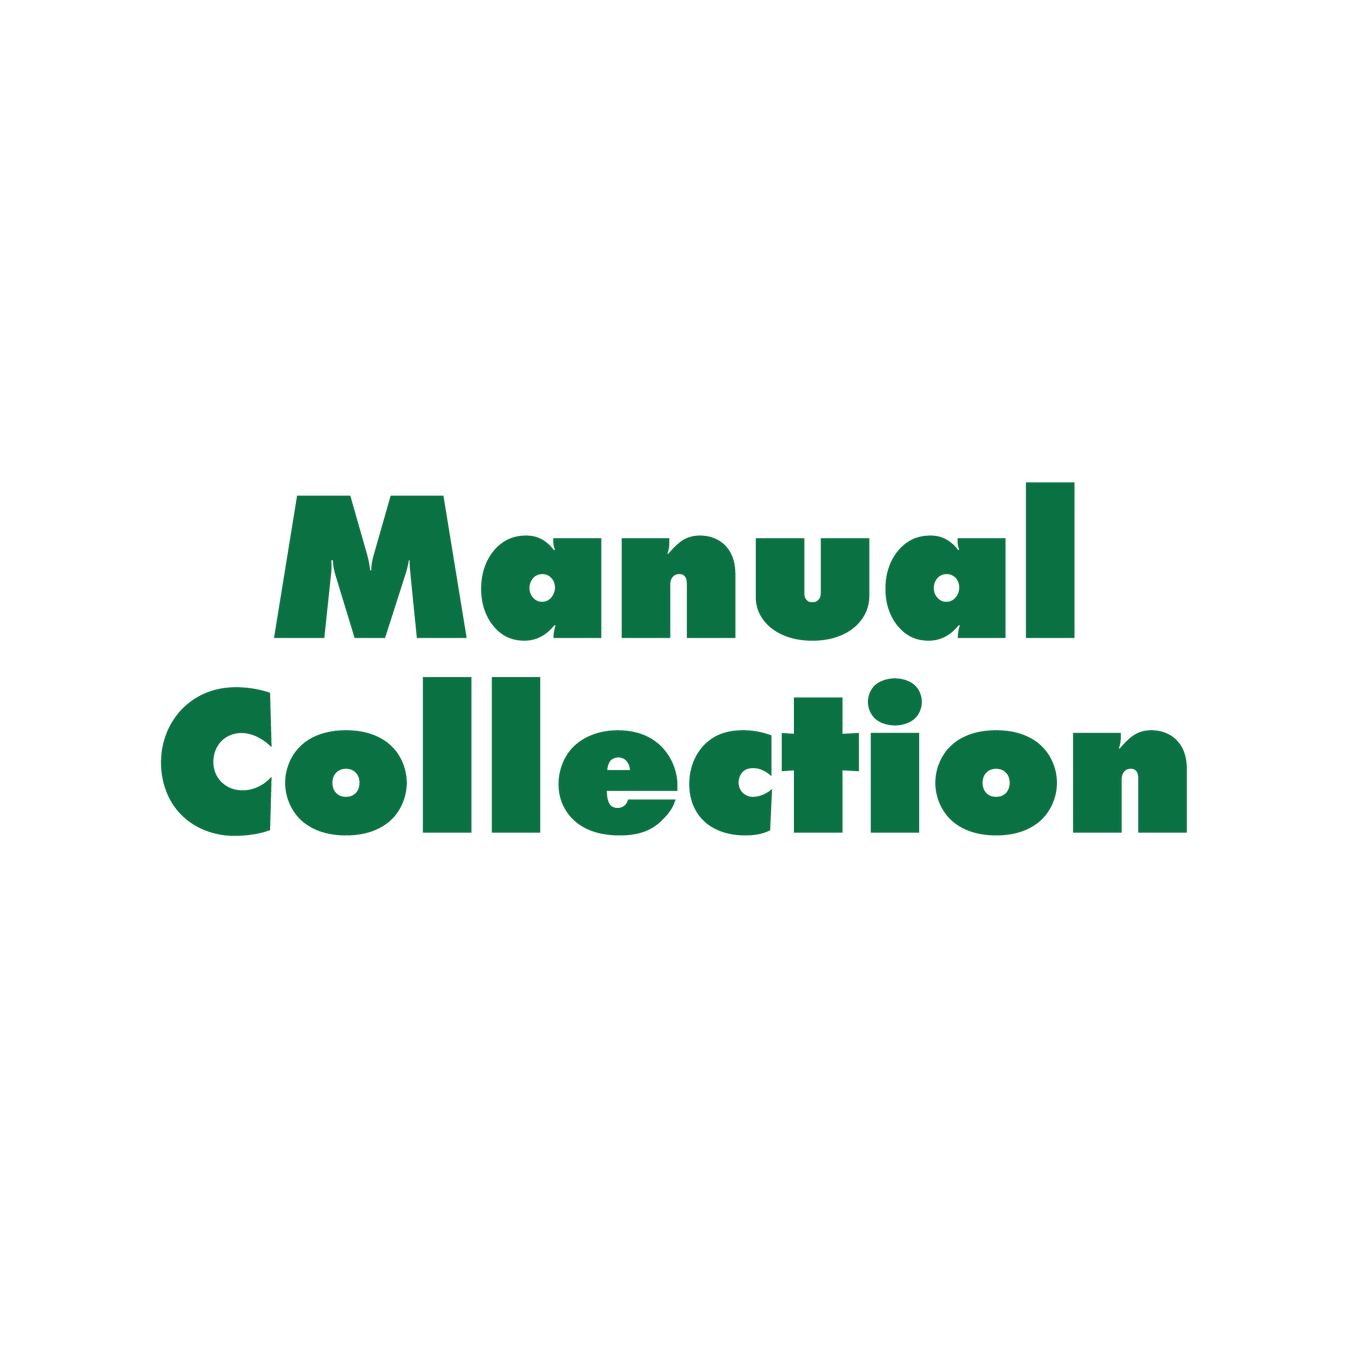 View Manual Collection